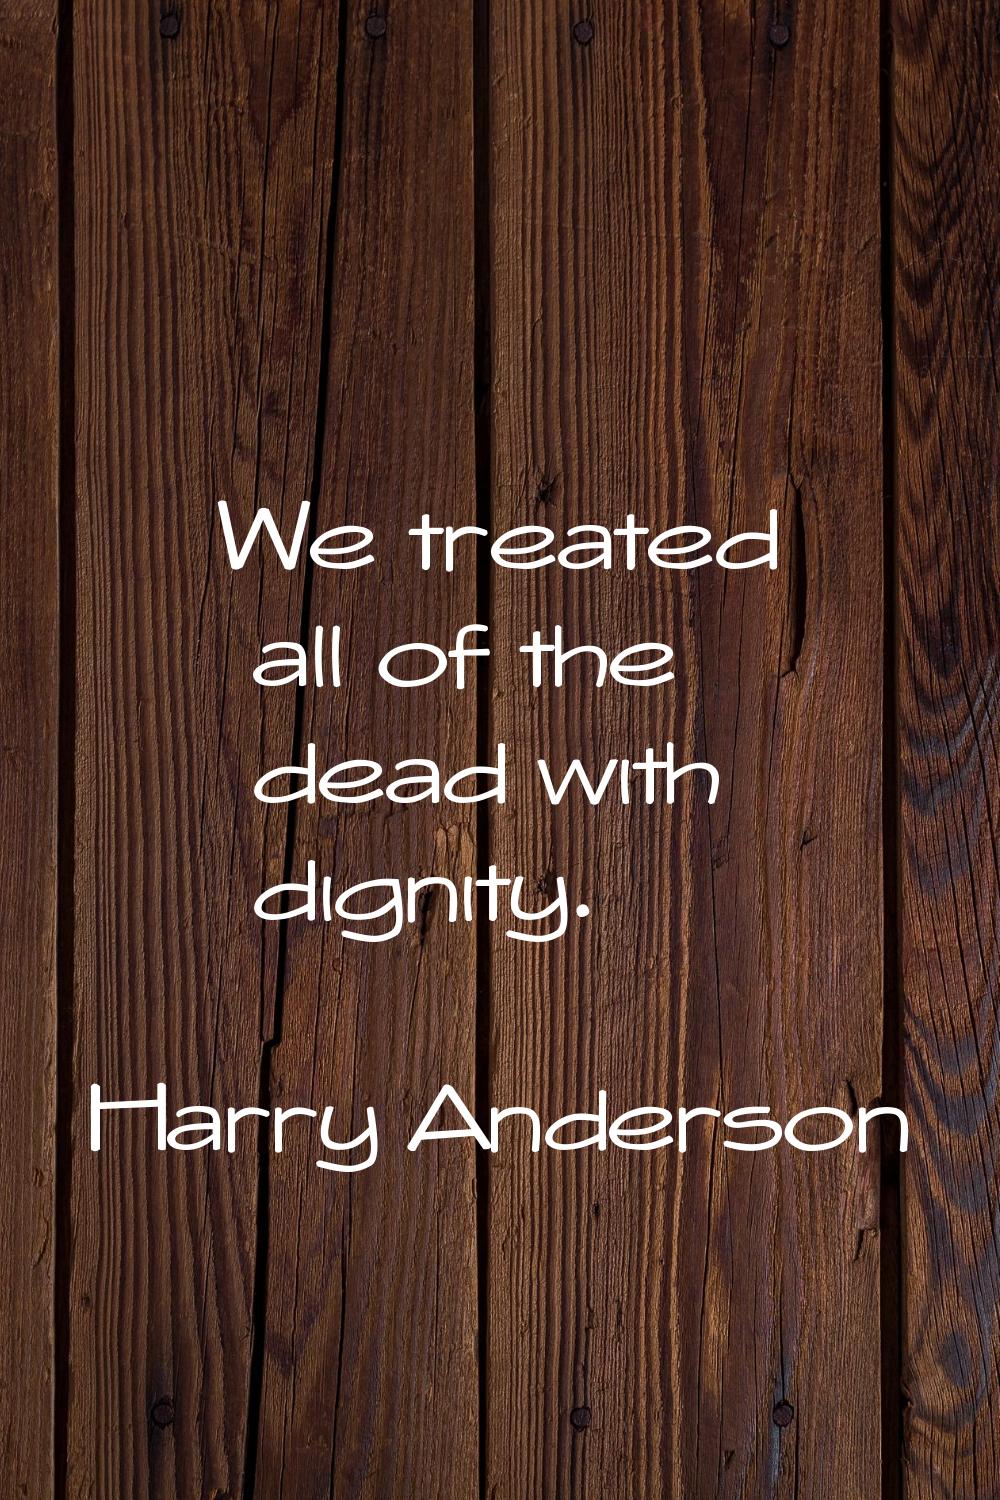 We treated all of the dead with dignity.